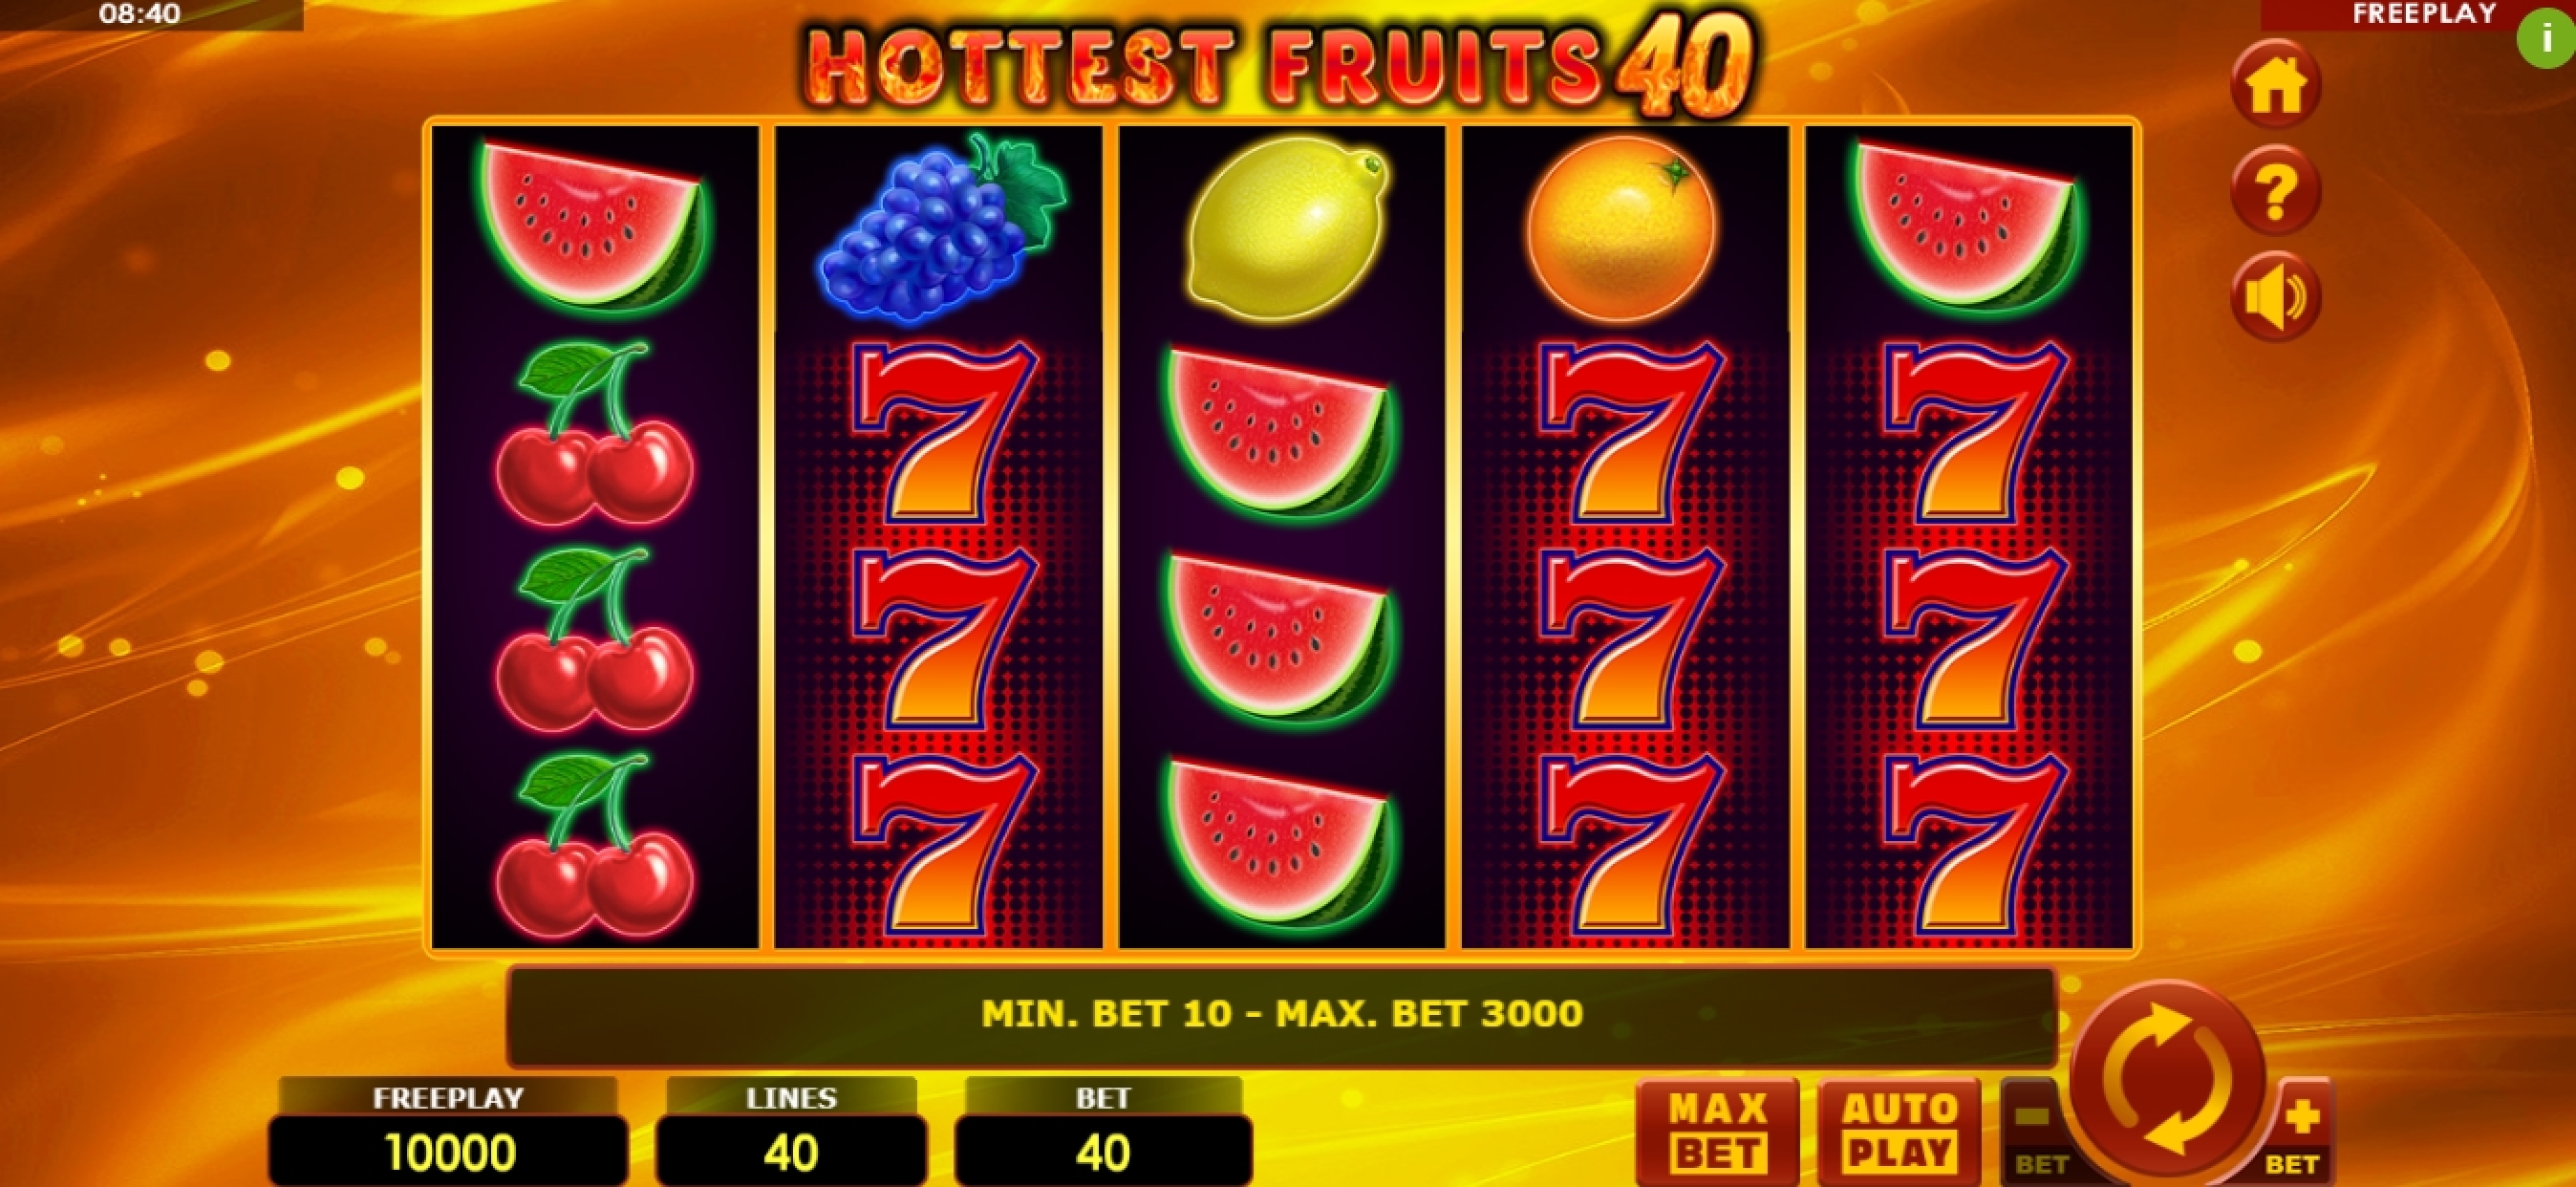 Play Hottest Fruits 40 Free Casino Slot Game by Amatic Industries